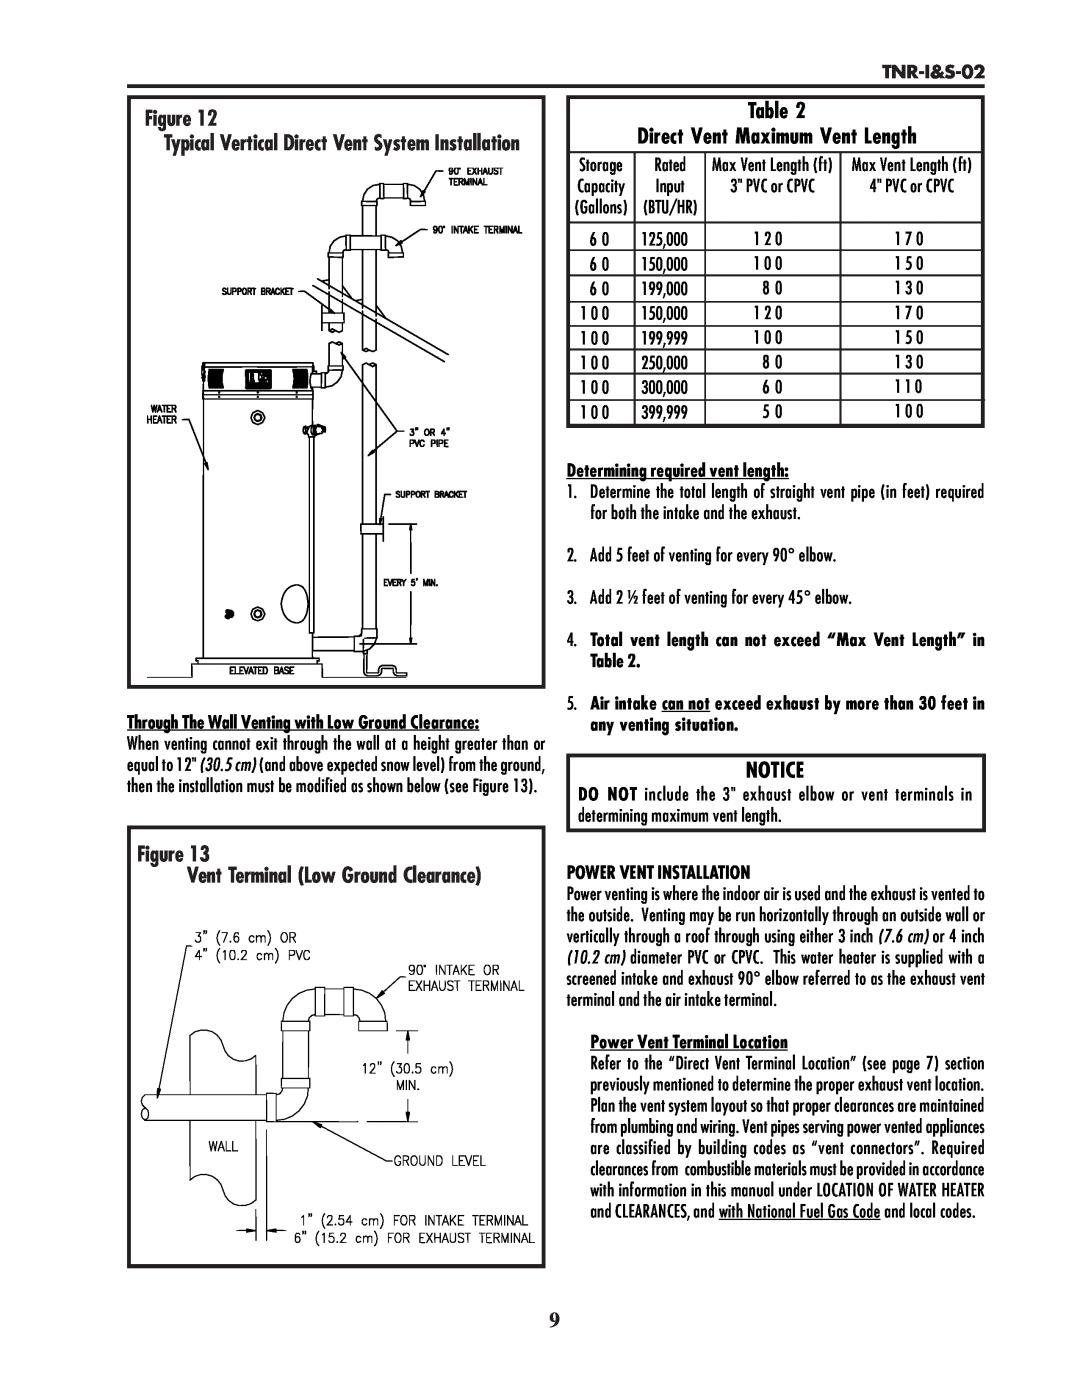 Lochinvar TNR-I&S-02 Table Direct Vent Maximum Vent Length, Determining required vent length, Power Vent Installation 